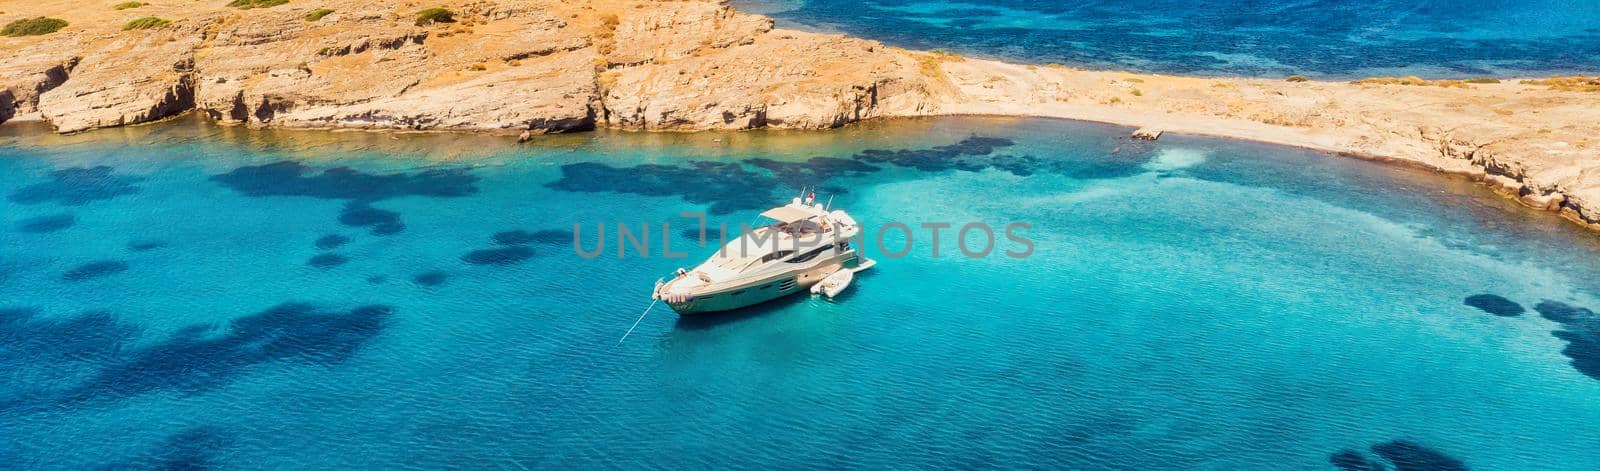 View from above, stunning aerial view of a bay with boat, luxury yacht sailing on a turquoise, clear water. by igor010